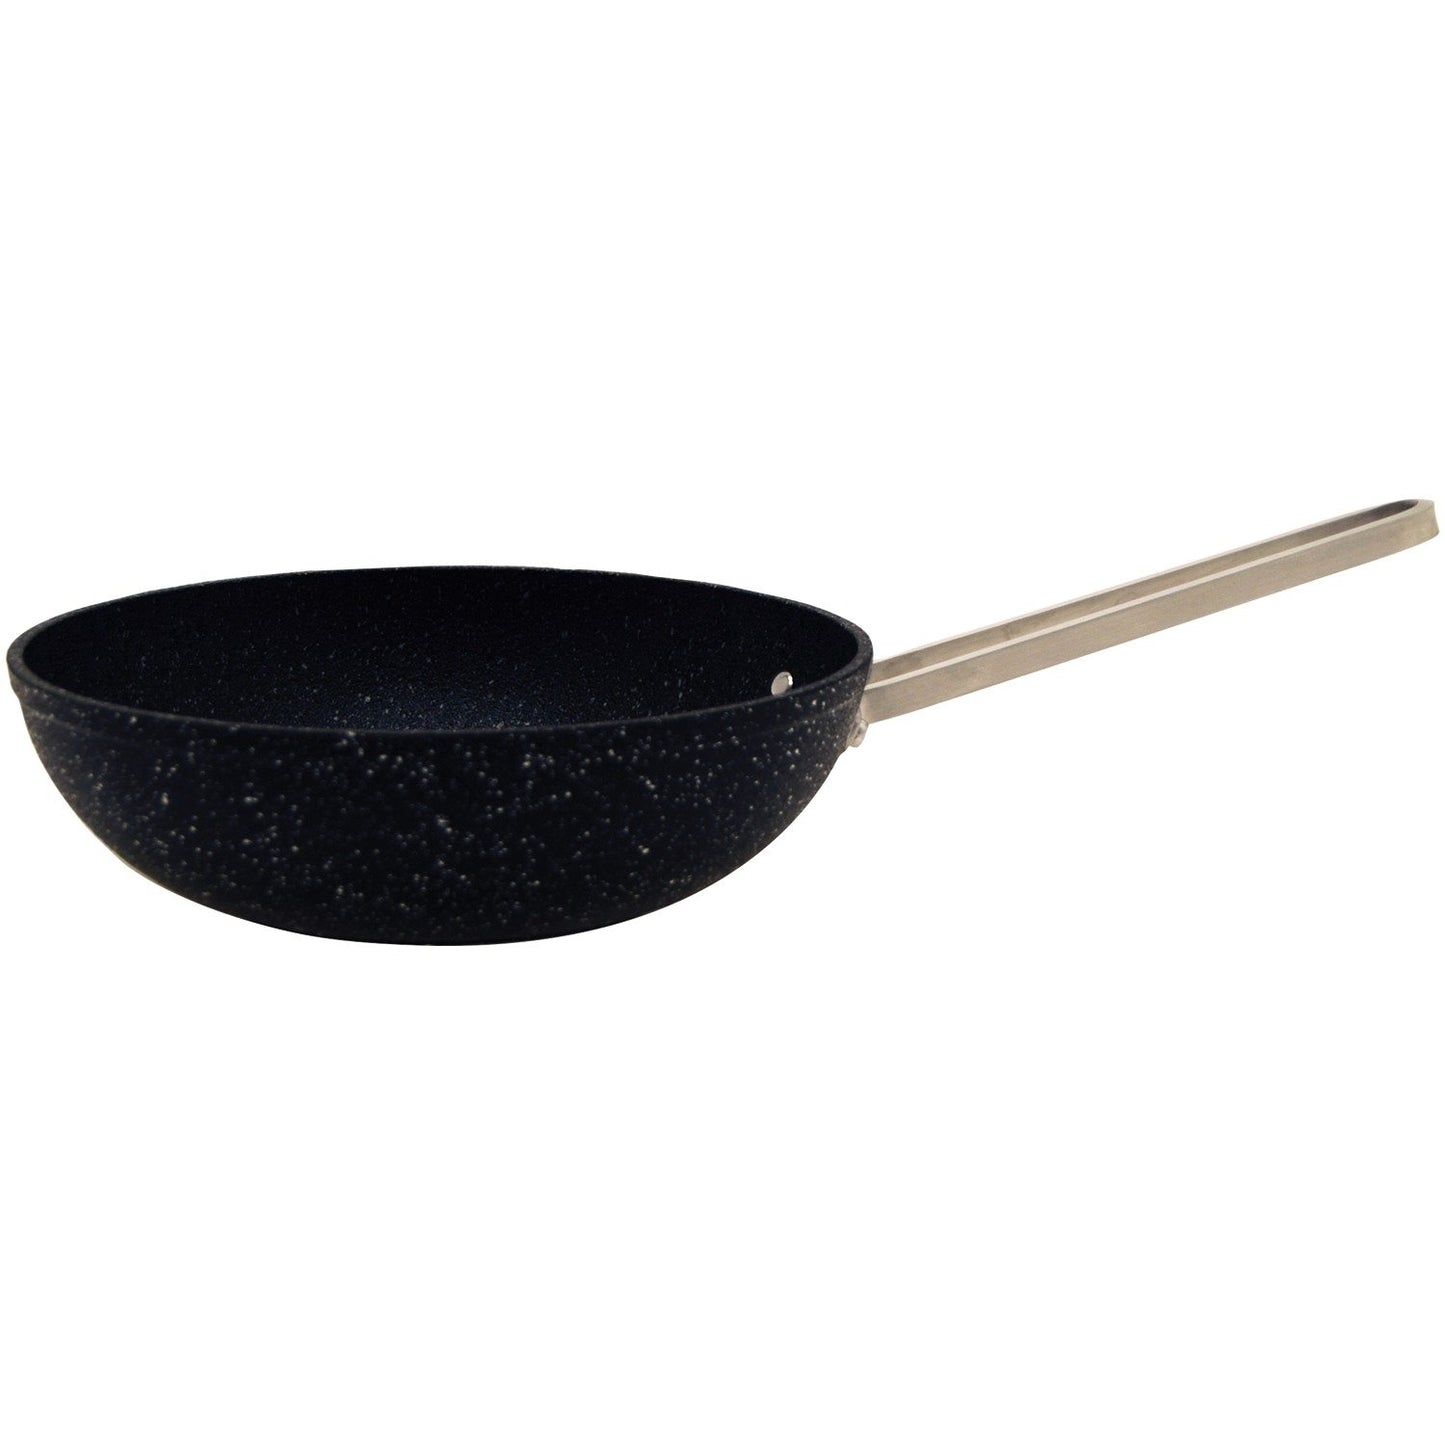 THE ROCK 030279-006-0000 Rock Personel Wok Stainless